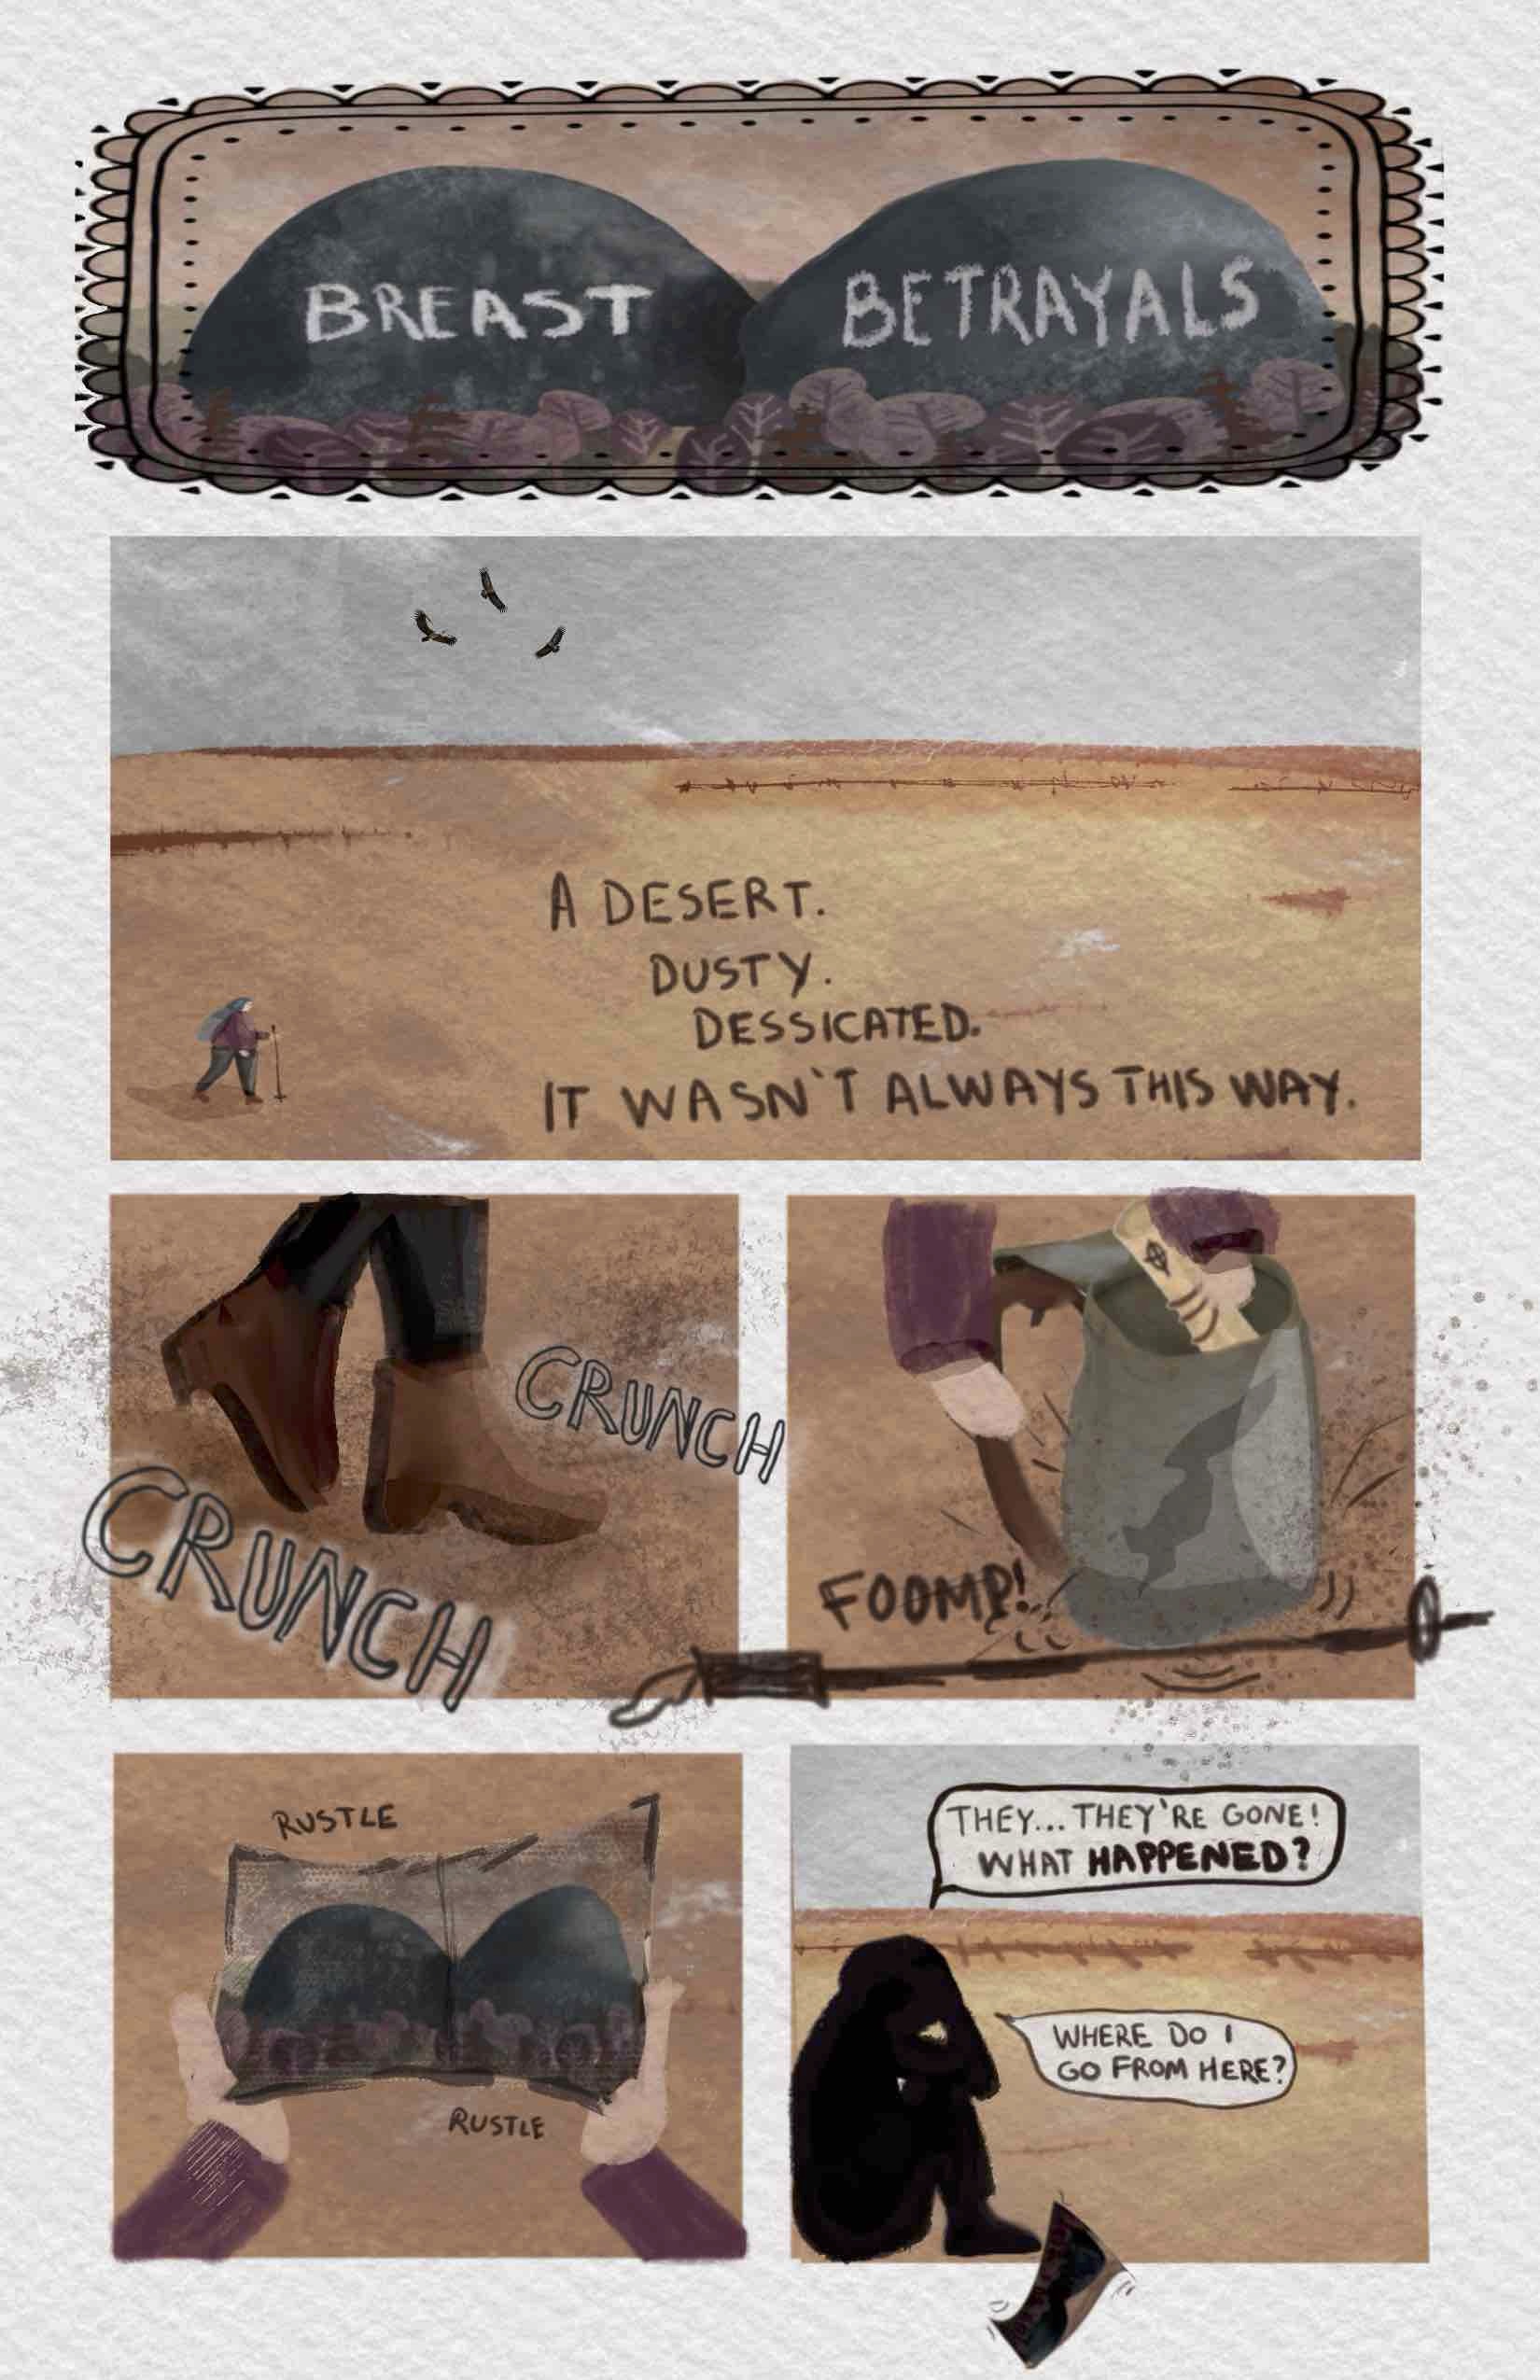 The comic is rendered digitally on a textured paper background with a gouache-like brush. The title panel features two dark mounds reminiscent of breasts, surrounded by purple shrubs and a brown landscape background. The panel border is decorative. On the mounds in white text, the title reads: â€œBREAST BETRAYALS.â€ In a long shot of a desert landscape, a small figure trudges forwards with the help of a trekking pole. Three birds, perhaps vultures, fly overhead in the distance. All-caps text covers the landscape, reading: â€œA desert. Dusty. Desiccated. It wasnâ€™t always this way.â€ A close-up of the figureâ€™s hiking boots walking over the dusty desert: â€œCRUNCH CRUNCH.â€ Then another close-up of the figureâ€™s hands rummaging through their backpack and pulling out a map scroll. They set their trekking pole on the ground: â€œFOOMP!â€ The figure opens the scroll - â€œrustle rustleâ€ - to reveal the two desert mounds from the title panel. We zoom out again to see a silhouette of the figure sitting down, knees to chest, arms resting on knees, head buried in their hands. They say, â€œTheyâ€¦theyâ€™re gone! What HAPPENED? Where do I go from here?â€ They have let the scroll go, which is carried off the panel in the wind.